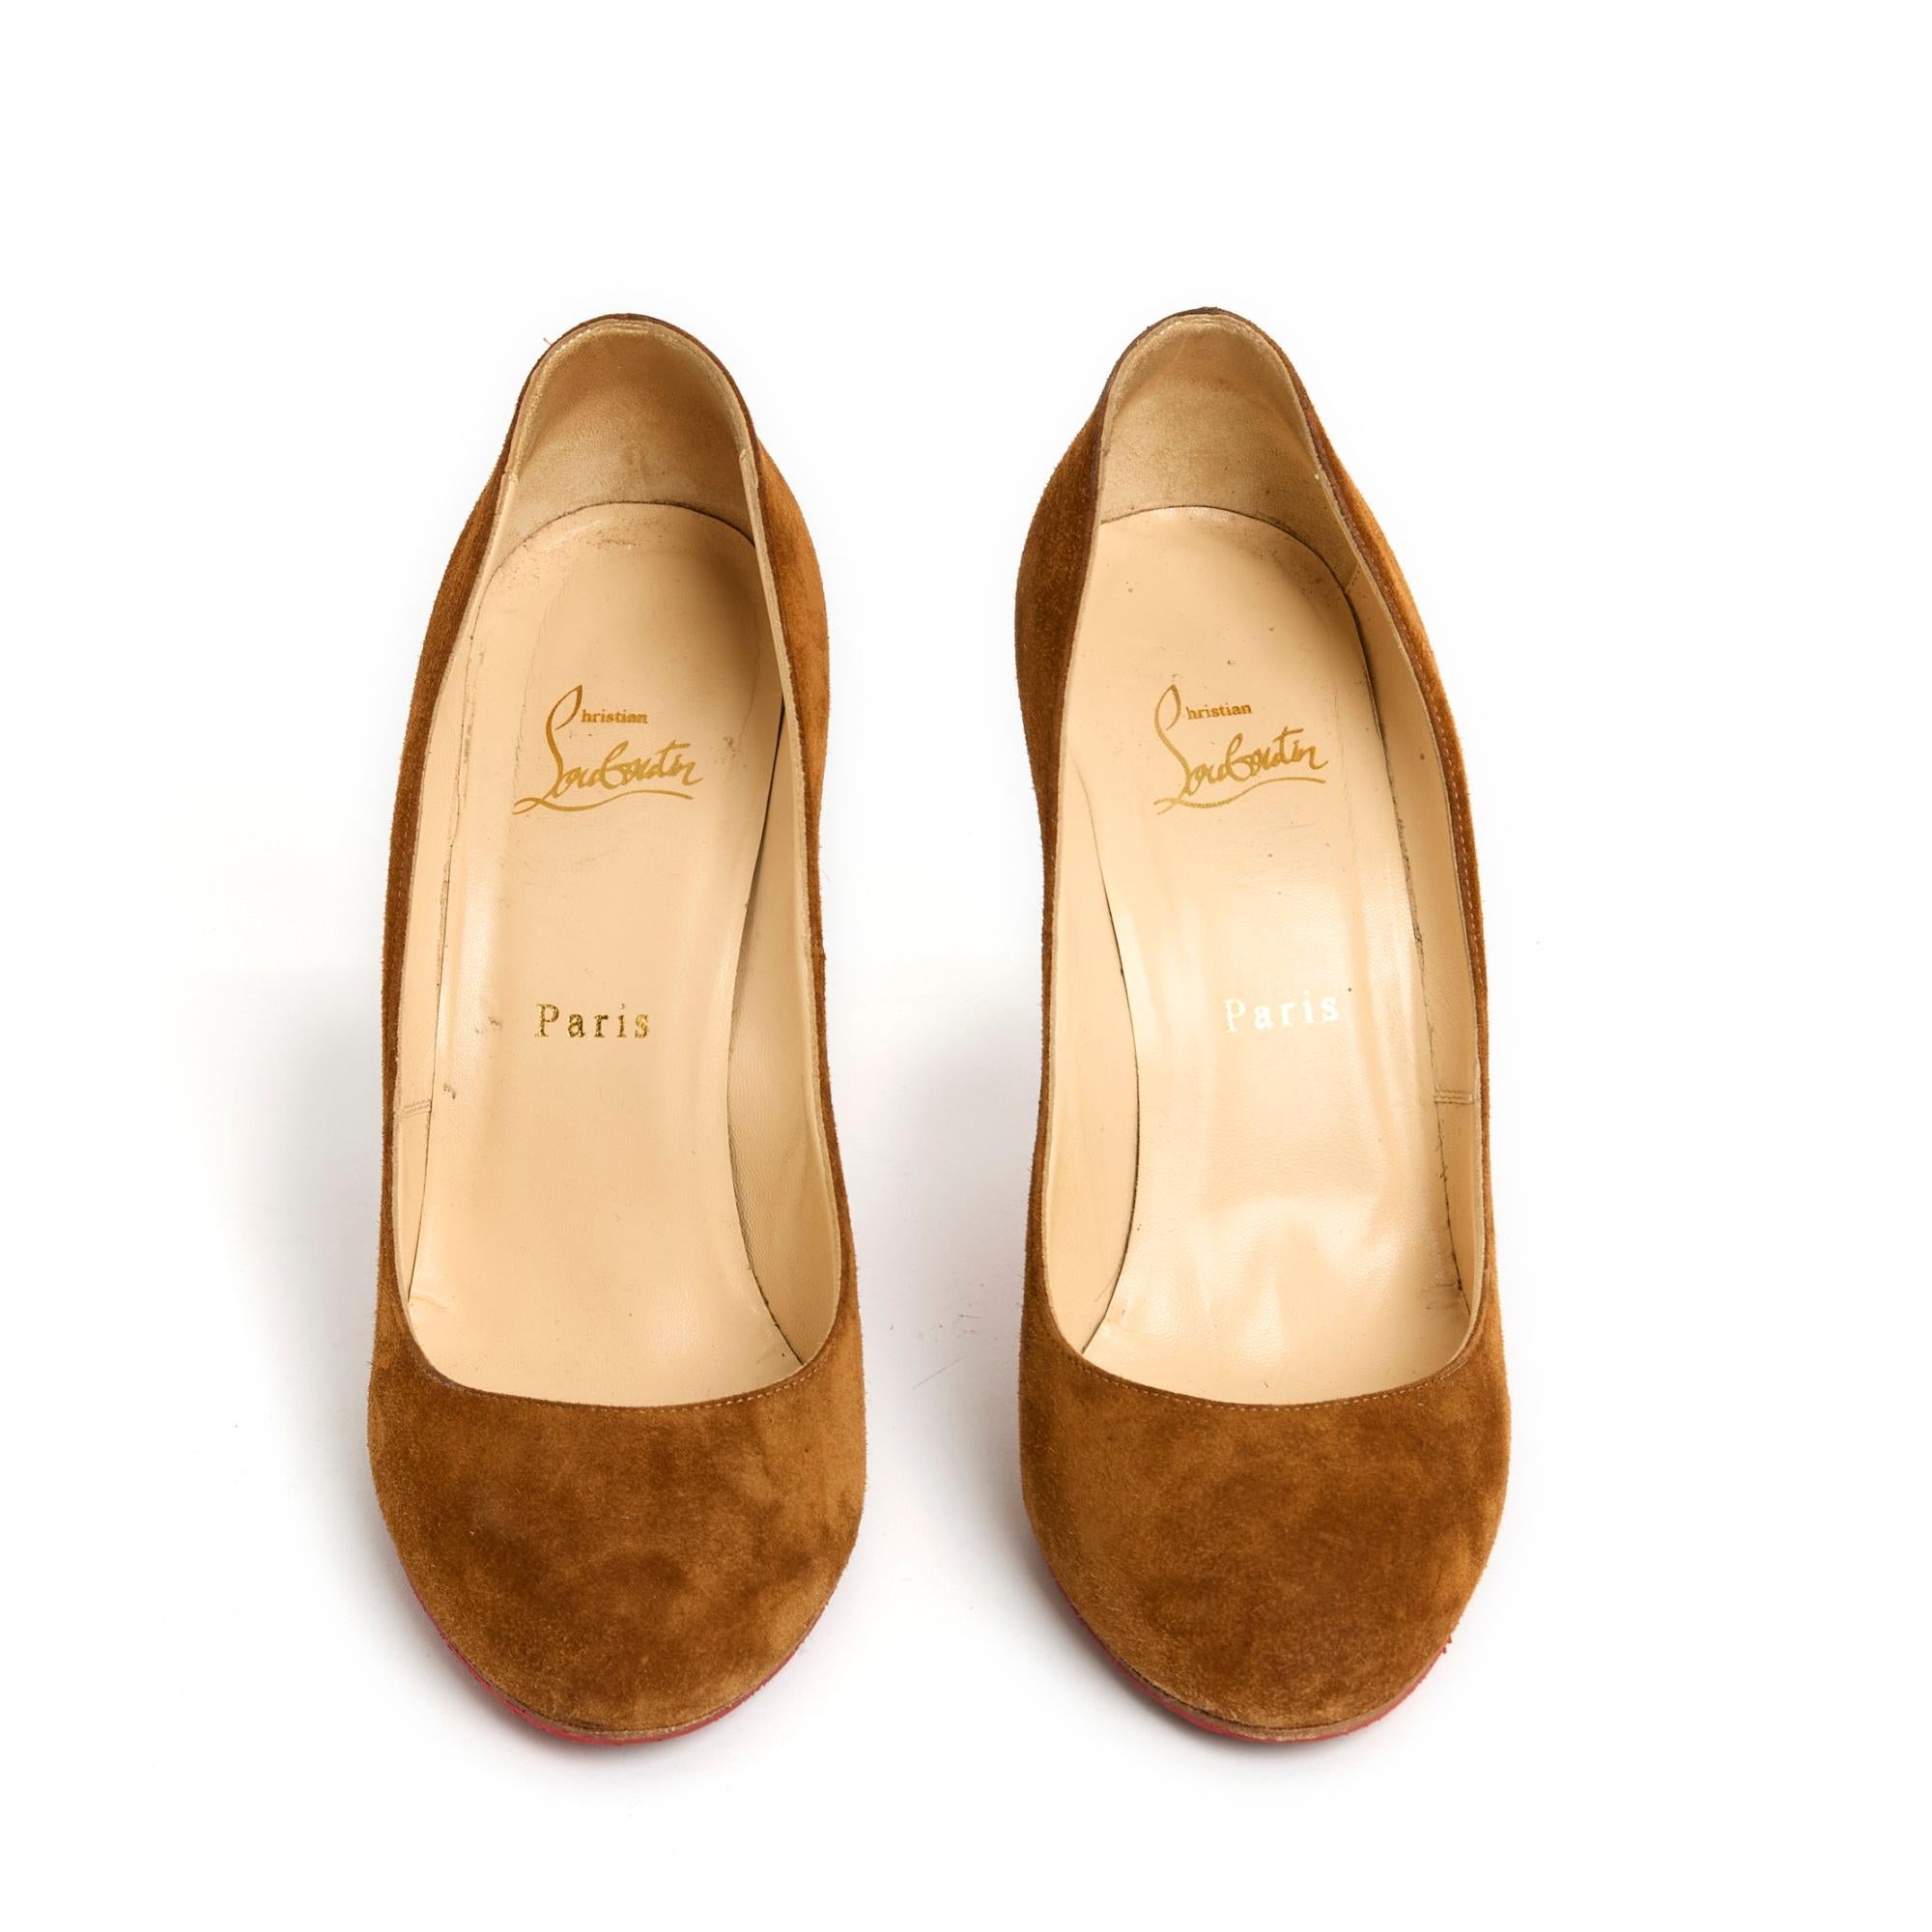 Christian Louboutin Fifi model pumps in camel-colored suede. Size 39.5FR i.e. UK6 and US8.5, heel 10 cm (11 cm less front insole 1 cm), insole 25.4 cm. The pumps were resoled at Louboutin... and this is surprising because the pumps are in perfect